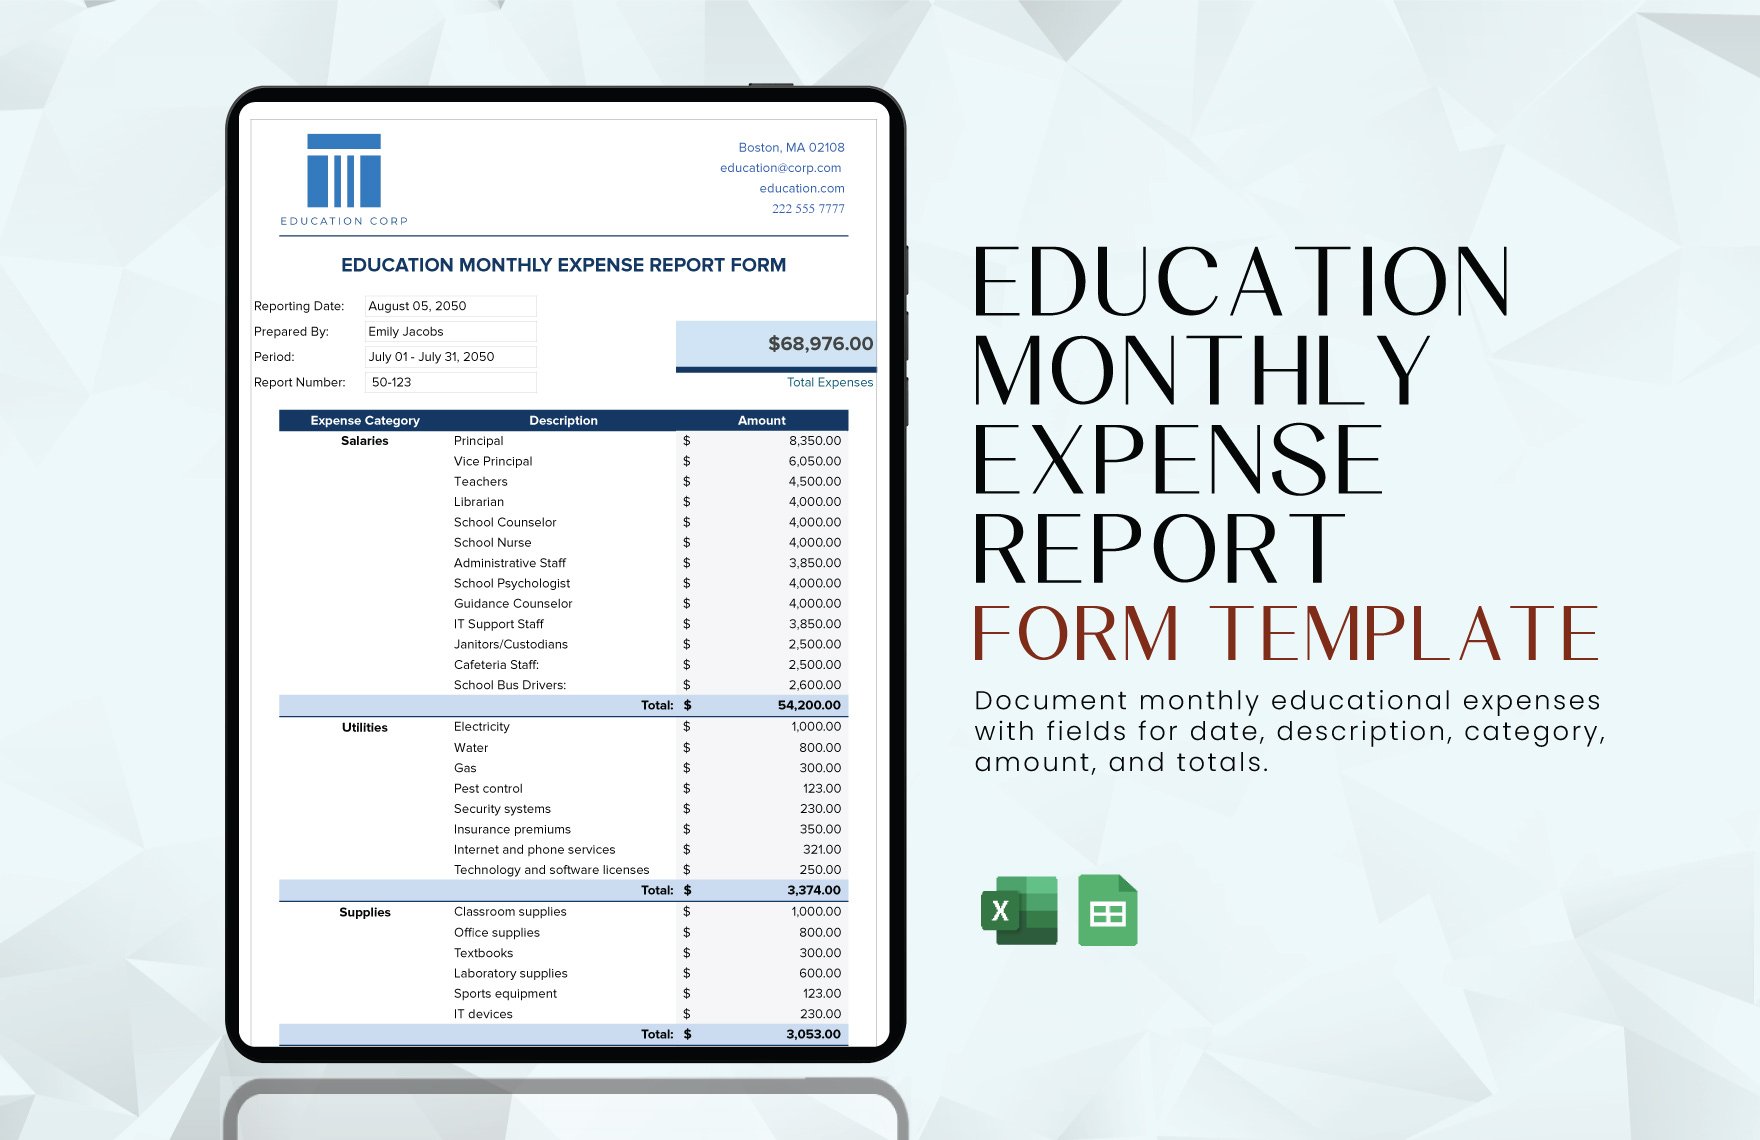 Education Monthly Expense Report Form Template in Excel, Google Sheets